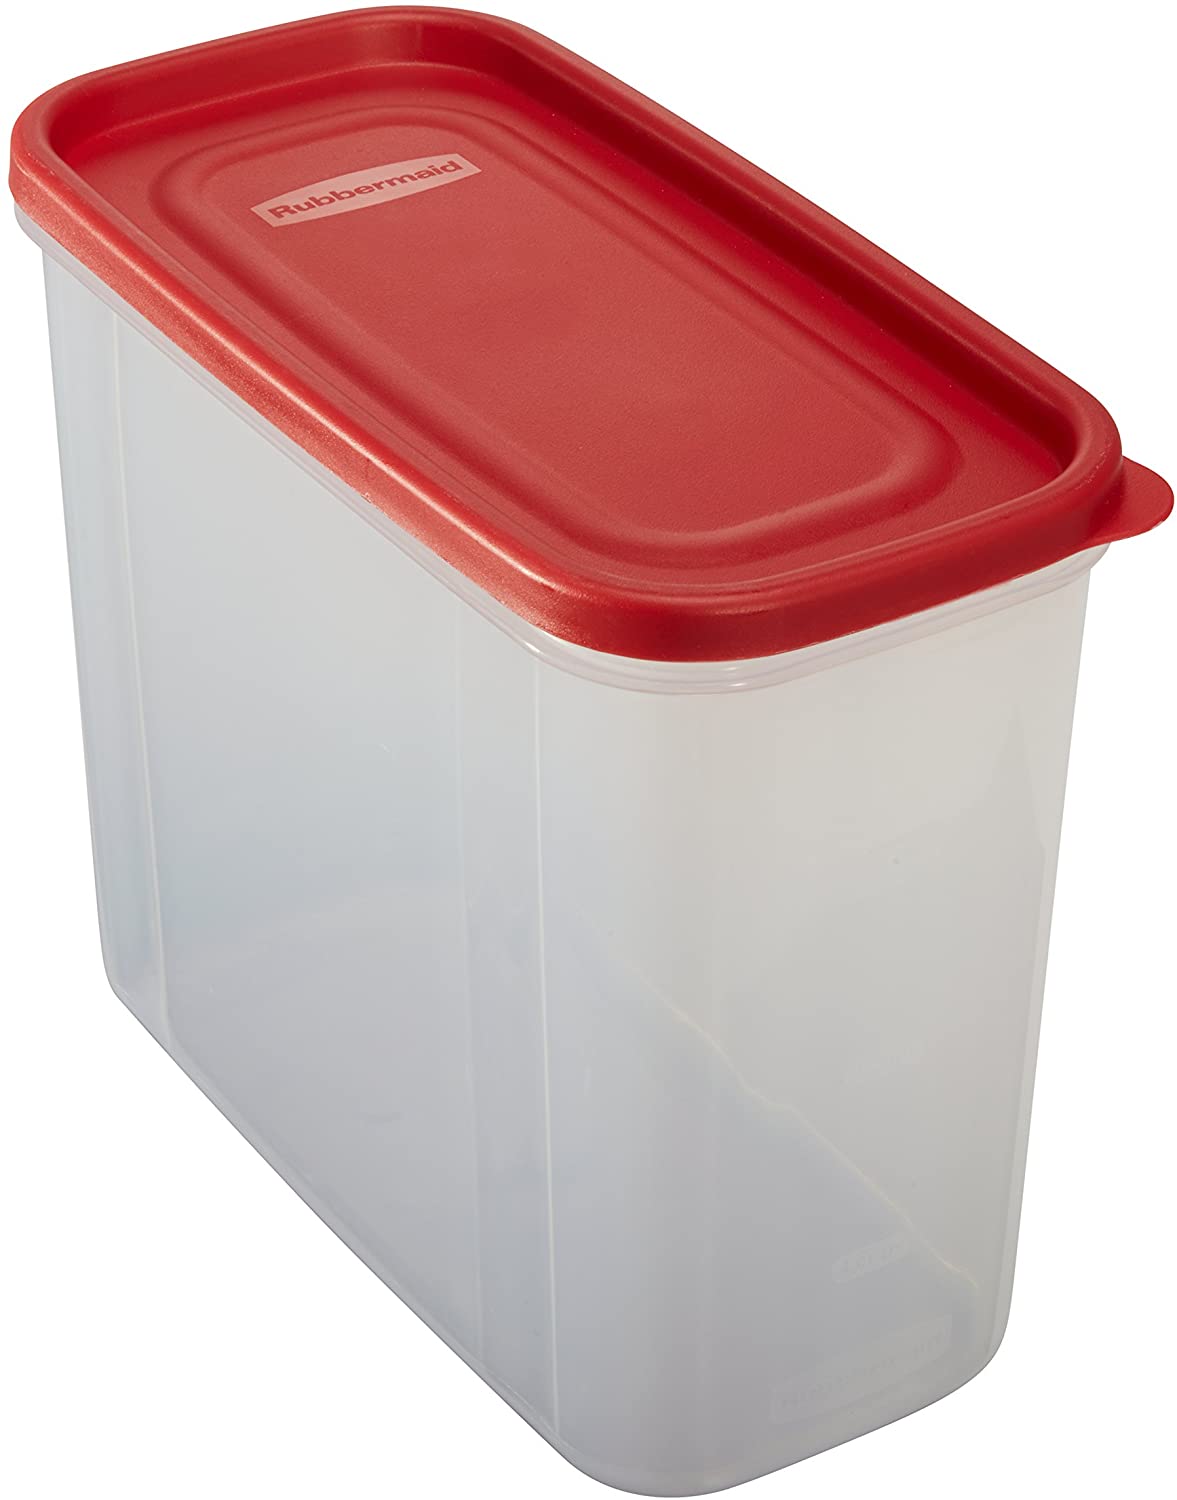 Komax Biokips Large Food Storage Container (169 oz.) Airtight Cookie  Container Suitable for Cookies, Chips, Flour, Bulk or